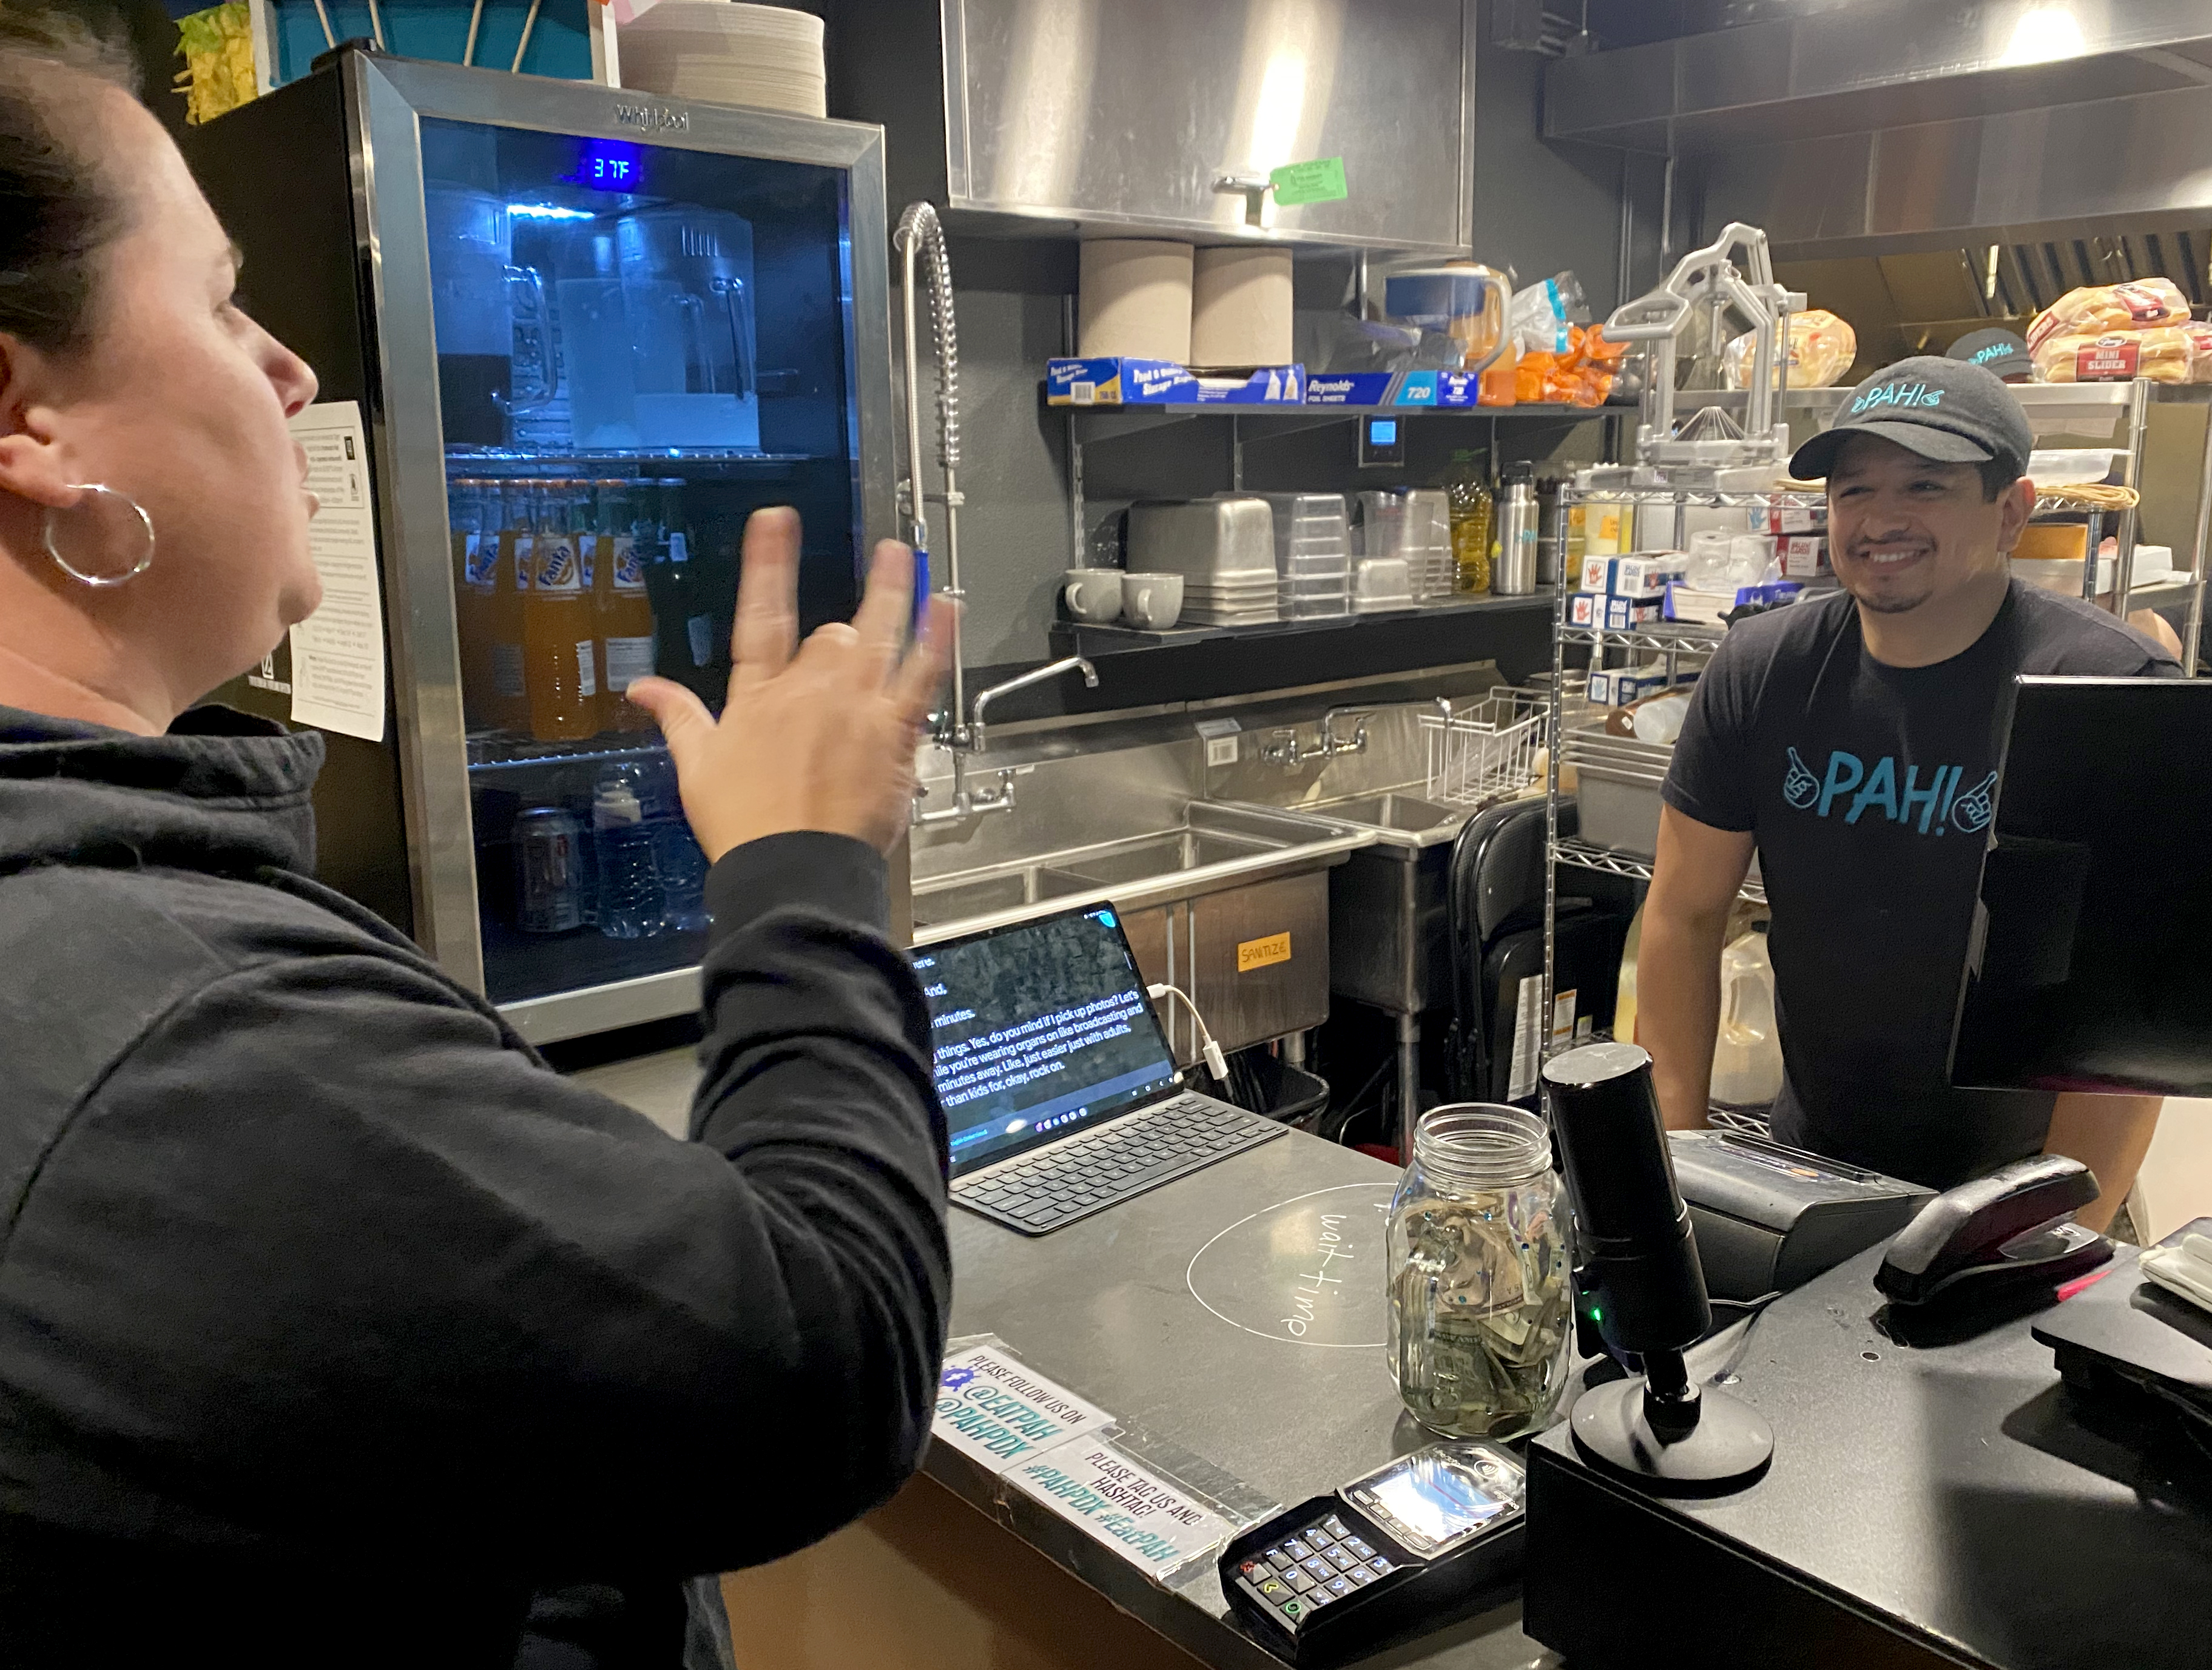 ASL teacher Sarah Caine orders dinner at Pah! restaurant from owner Lillouie Barrios. Located in The Zed in SE Portland,   the restaurant is proudly queer, Latinx, and deaf owned.